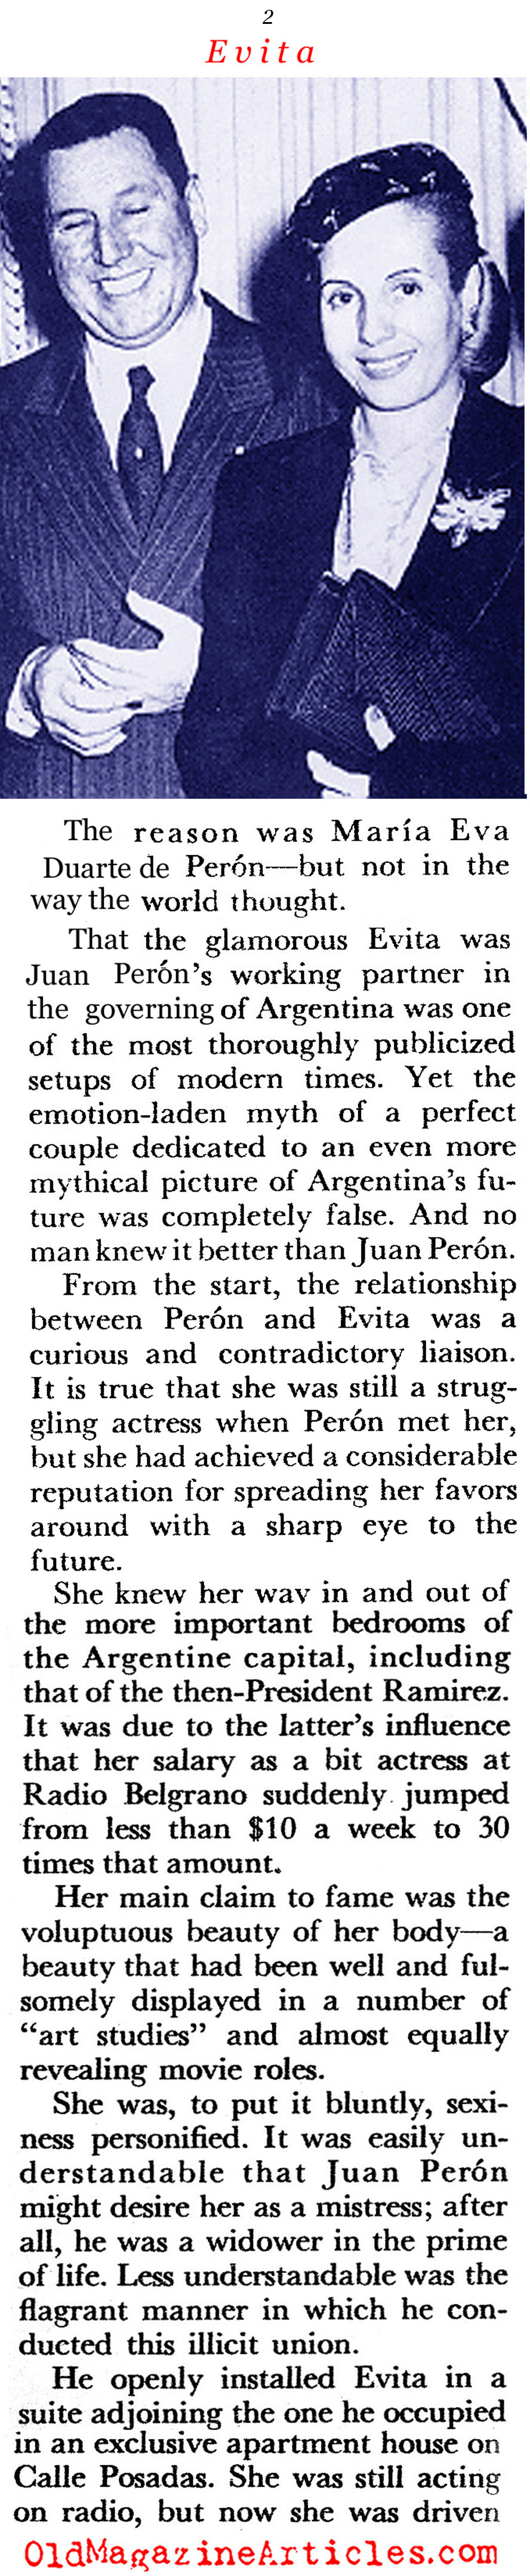 ''The Dictator and his Woman''  (Coronet Magazine, 1956)